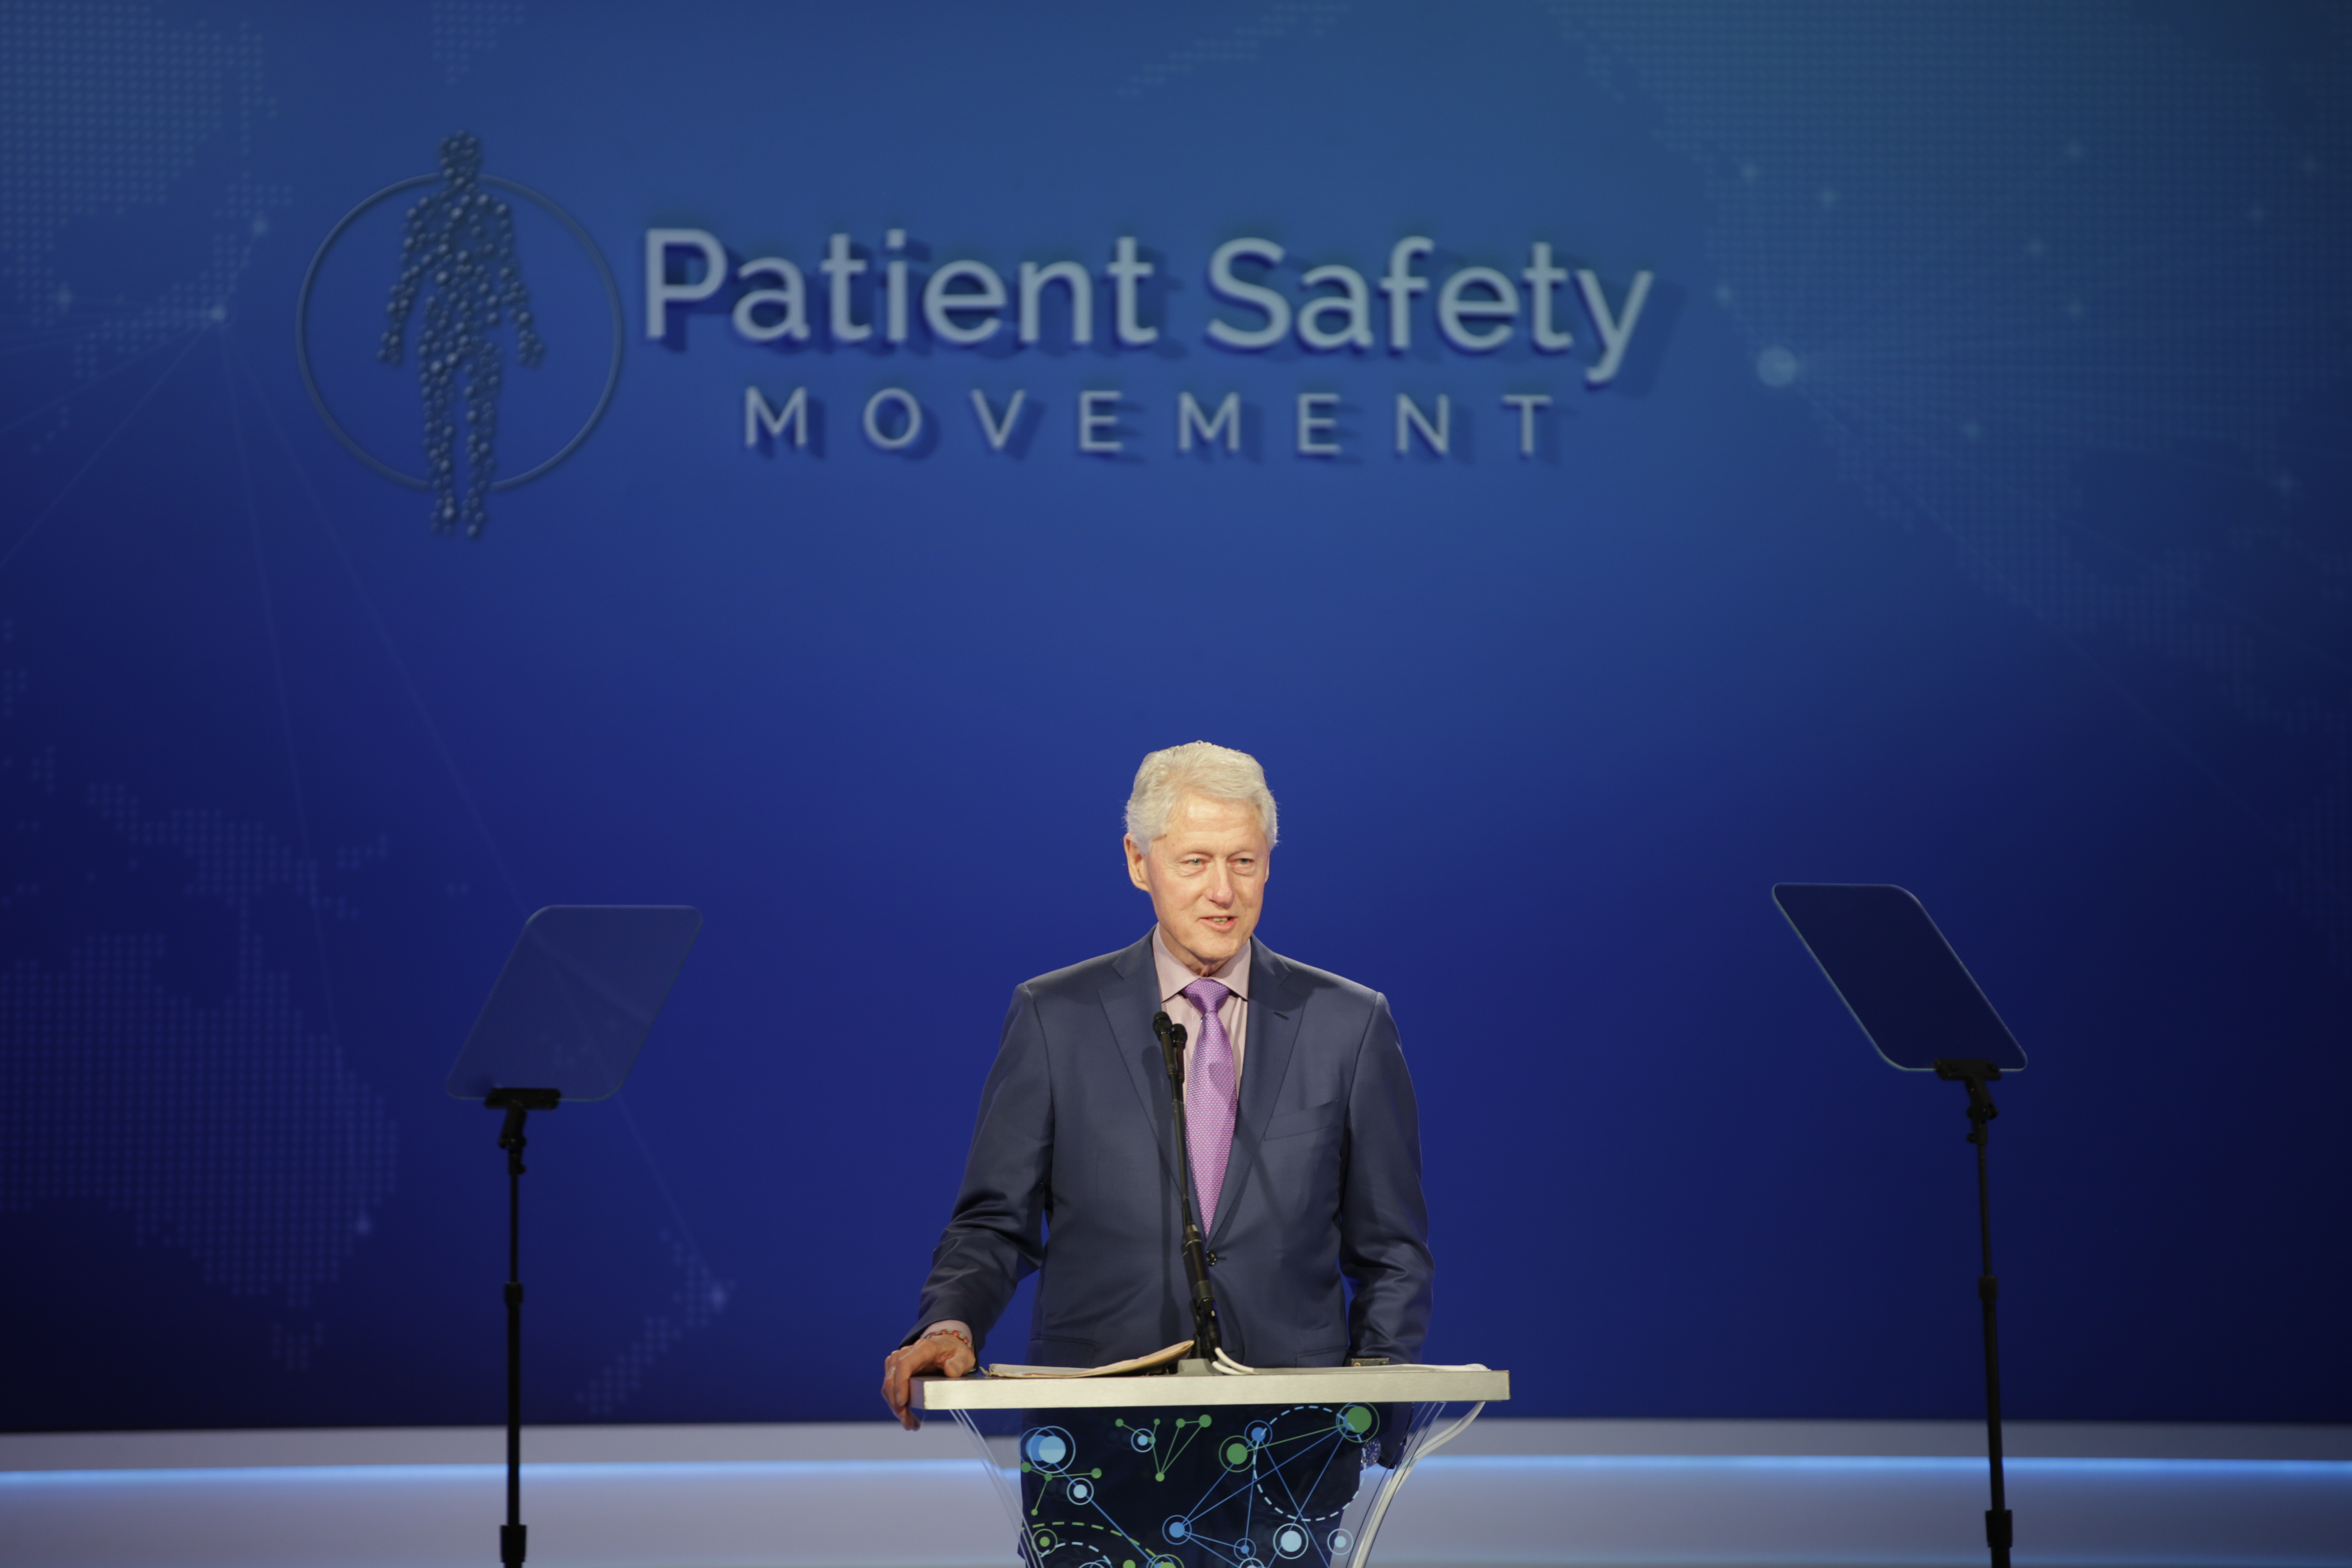 Patient Safety Movement Foundation 7th Annual Summit 2019 Recap and Review by Dr. Jessica Louie, Pharmacist Advocate at Find Your Script and The Burnout Doctor and Burnout Coach | Get to ZERO preventable deaths